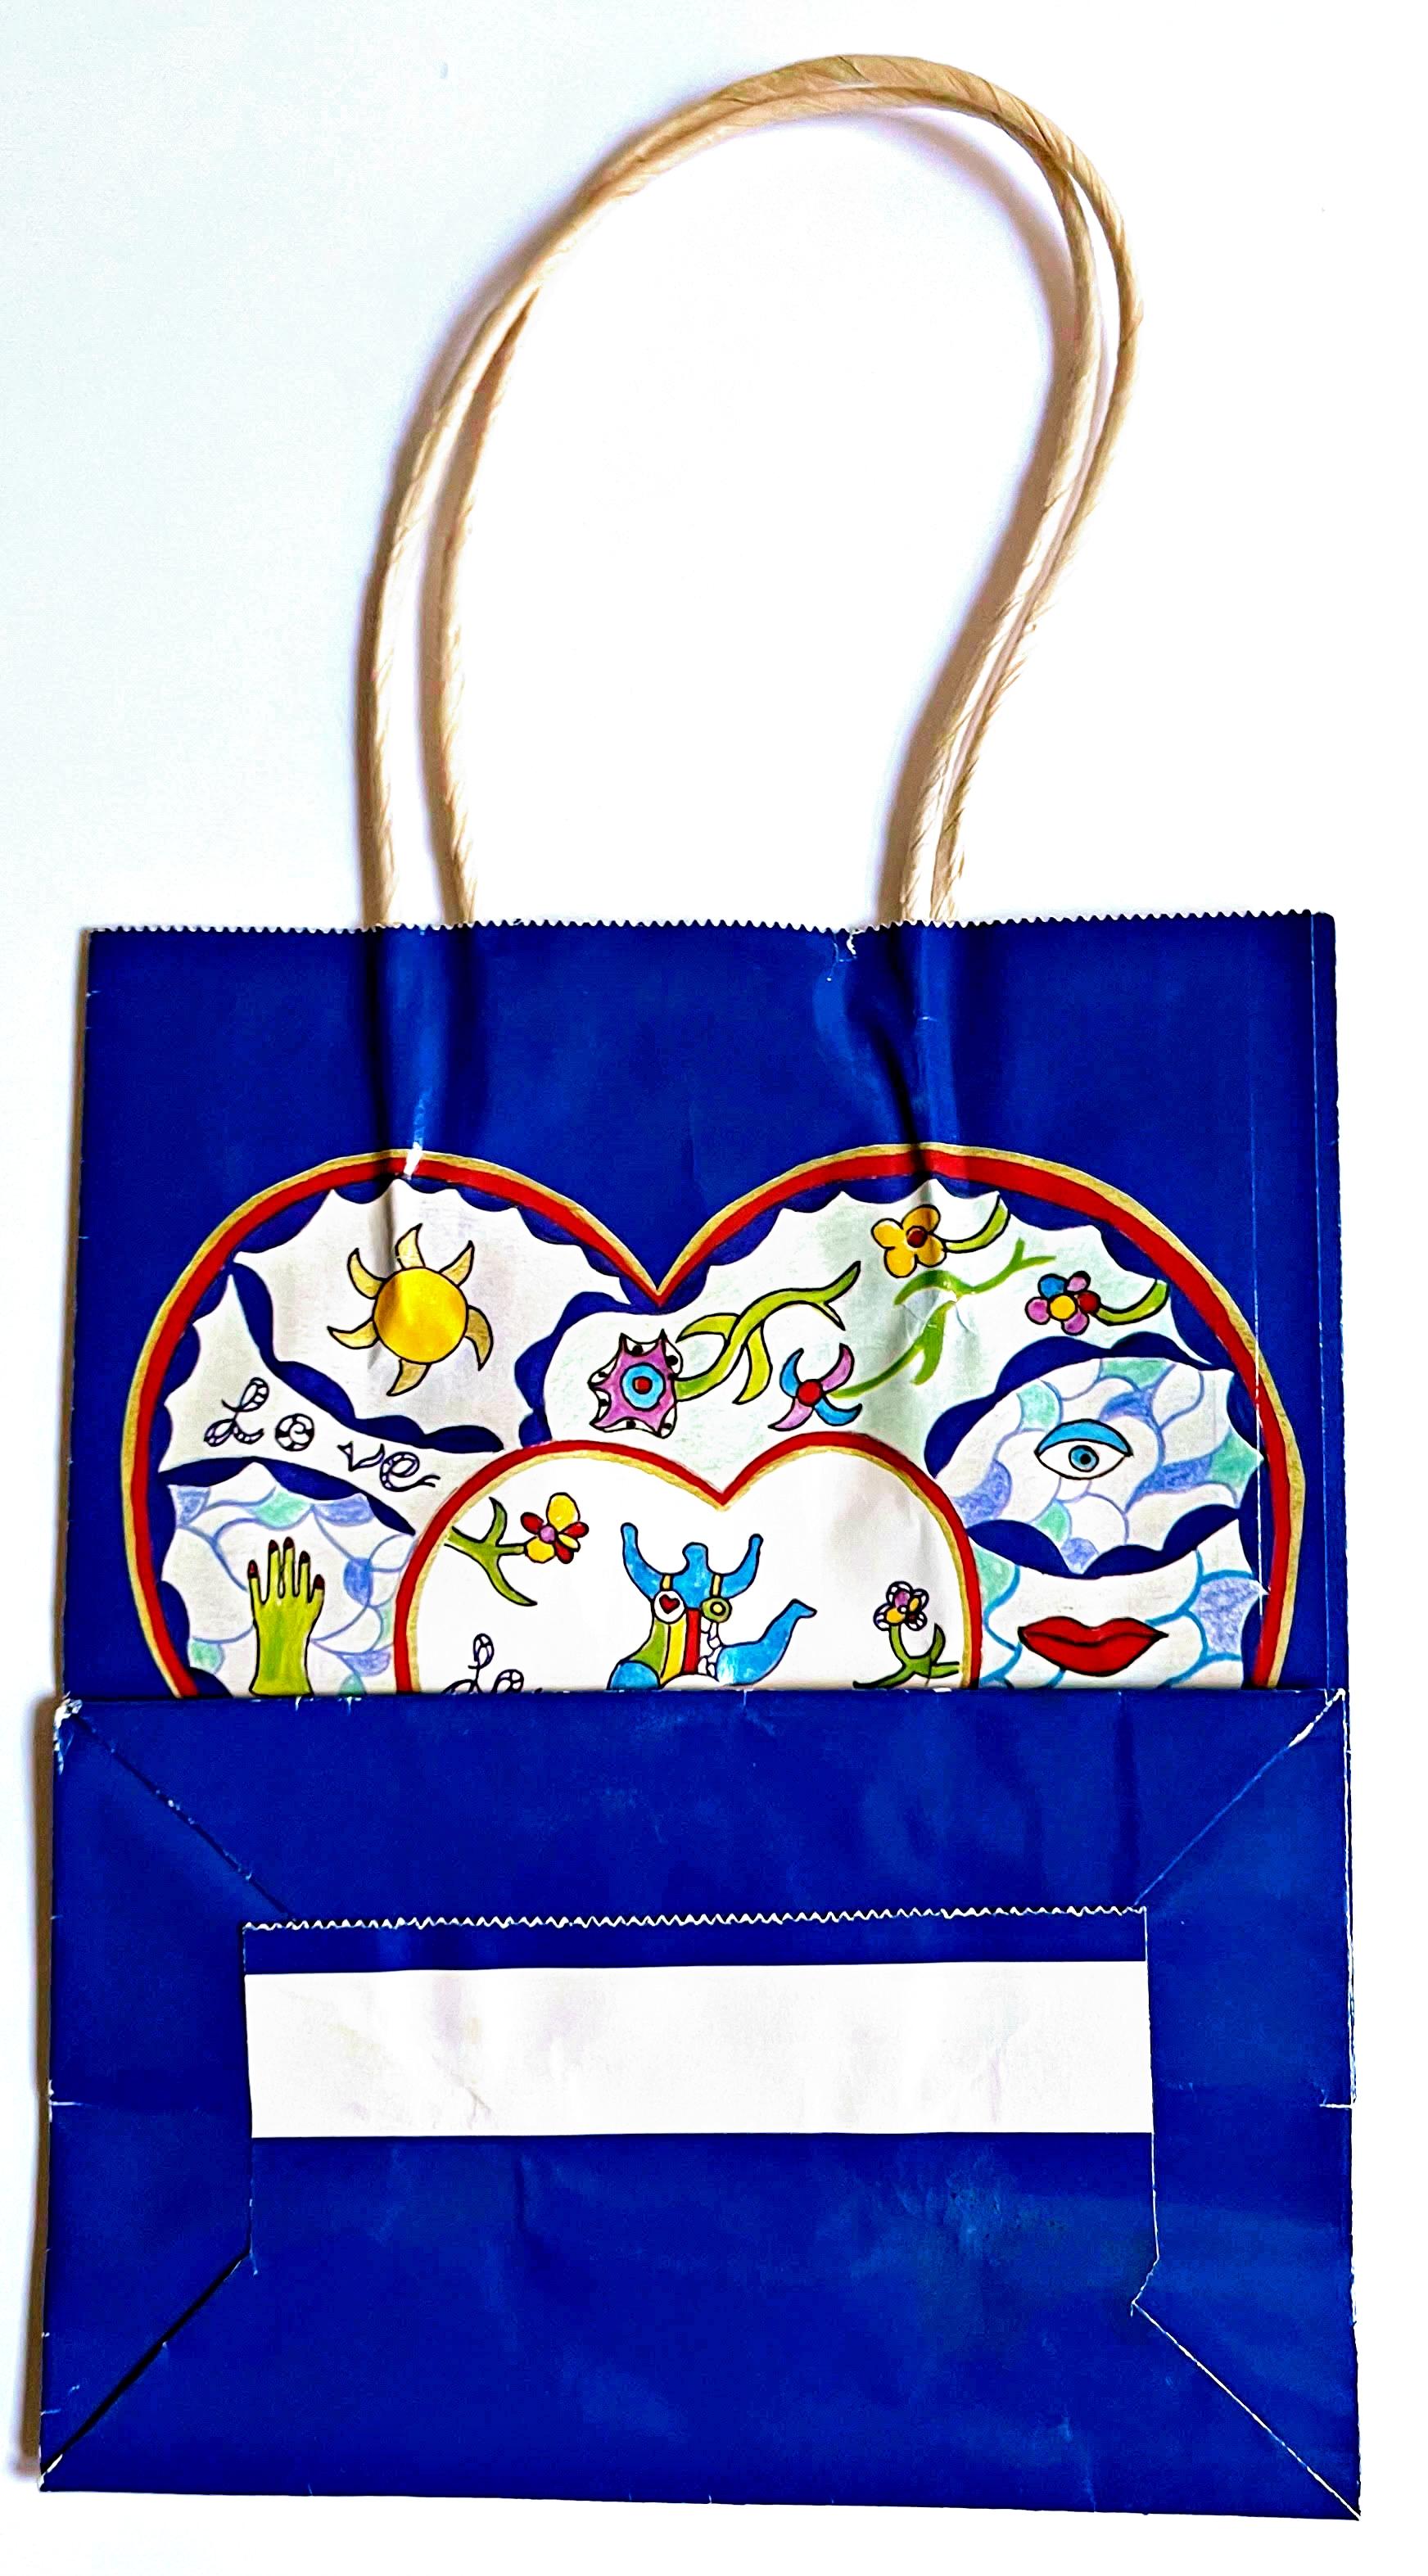 Niki de Saint Phalle
Niki de St Phalle Bespoke LOVE Shopping Bag, ca. 1982
Silkscreen on paper bag
9.5 x 8 inches
Unframed
The edition is unknown but we have yet to see any other examples of this charming little shopping bag come to market. We would